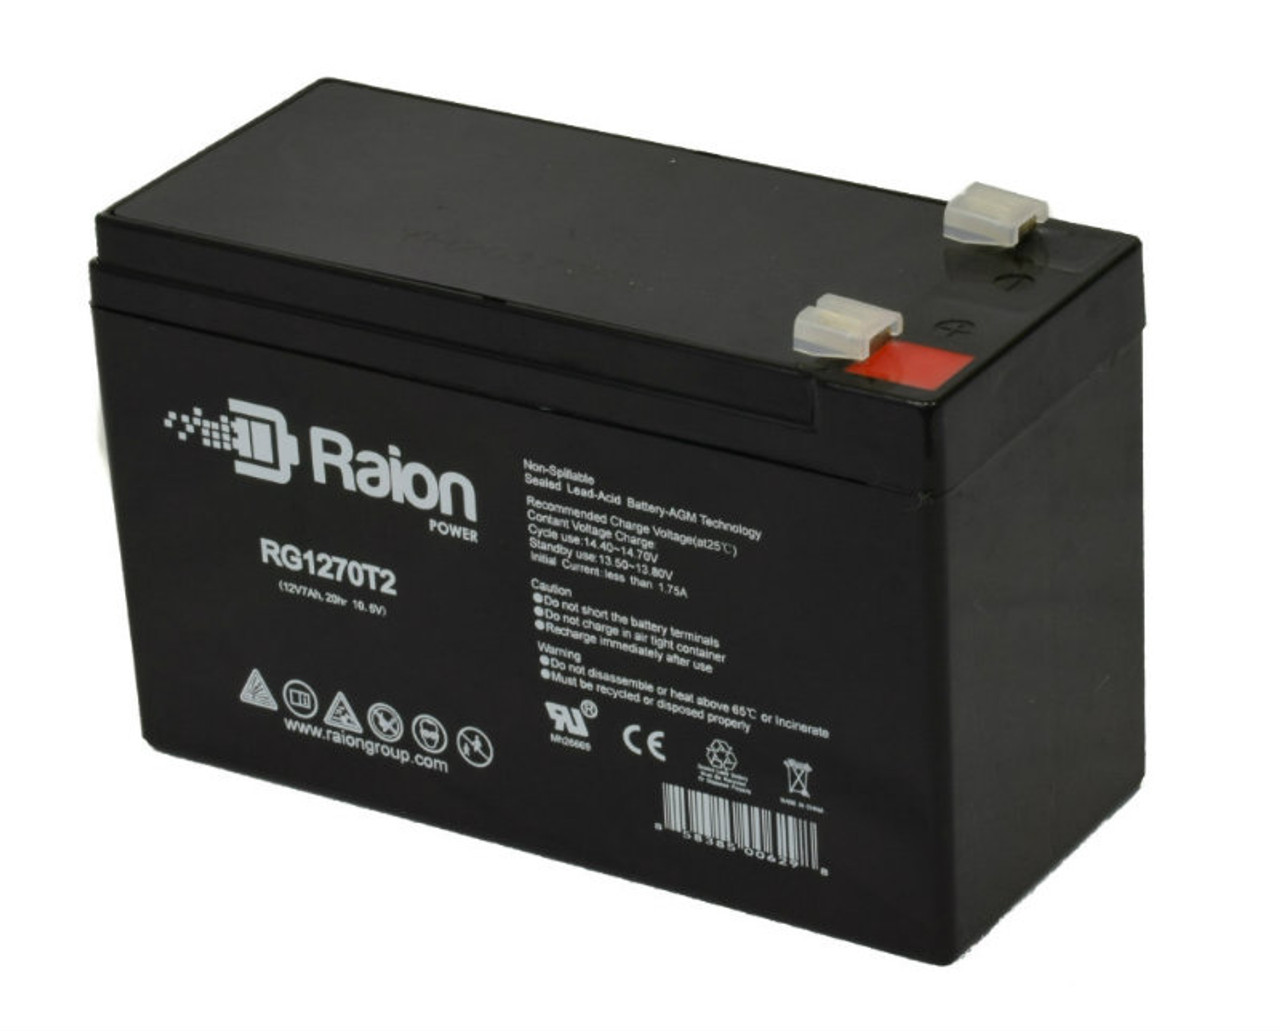 Raion Power RG1270T1 12V 7Ah Non-Spillable Replacement Battery for MHB MS7-12A F1